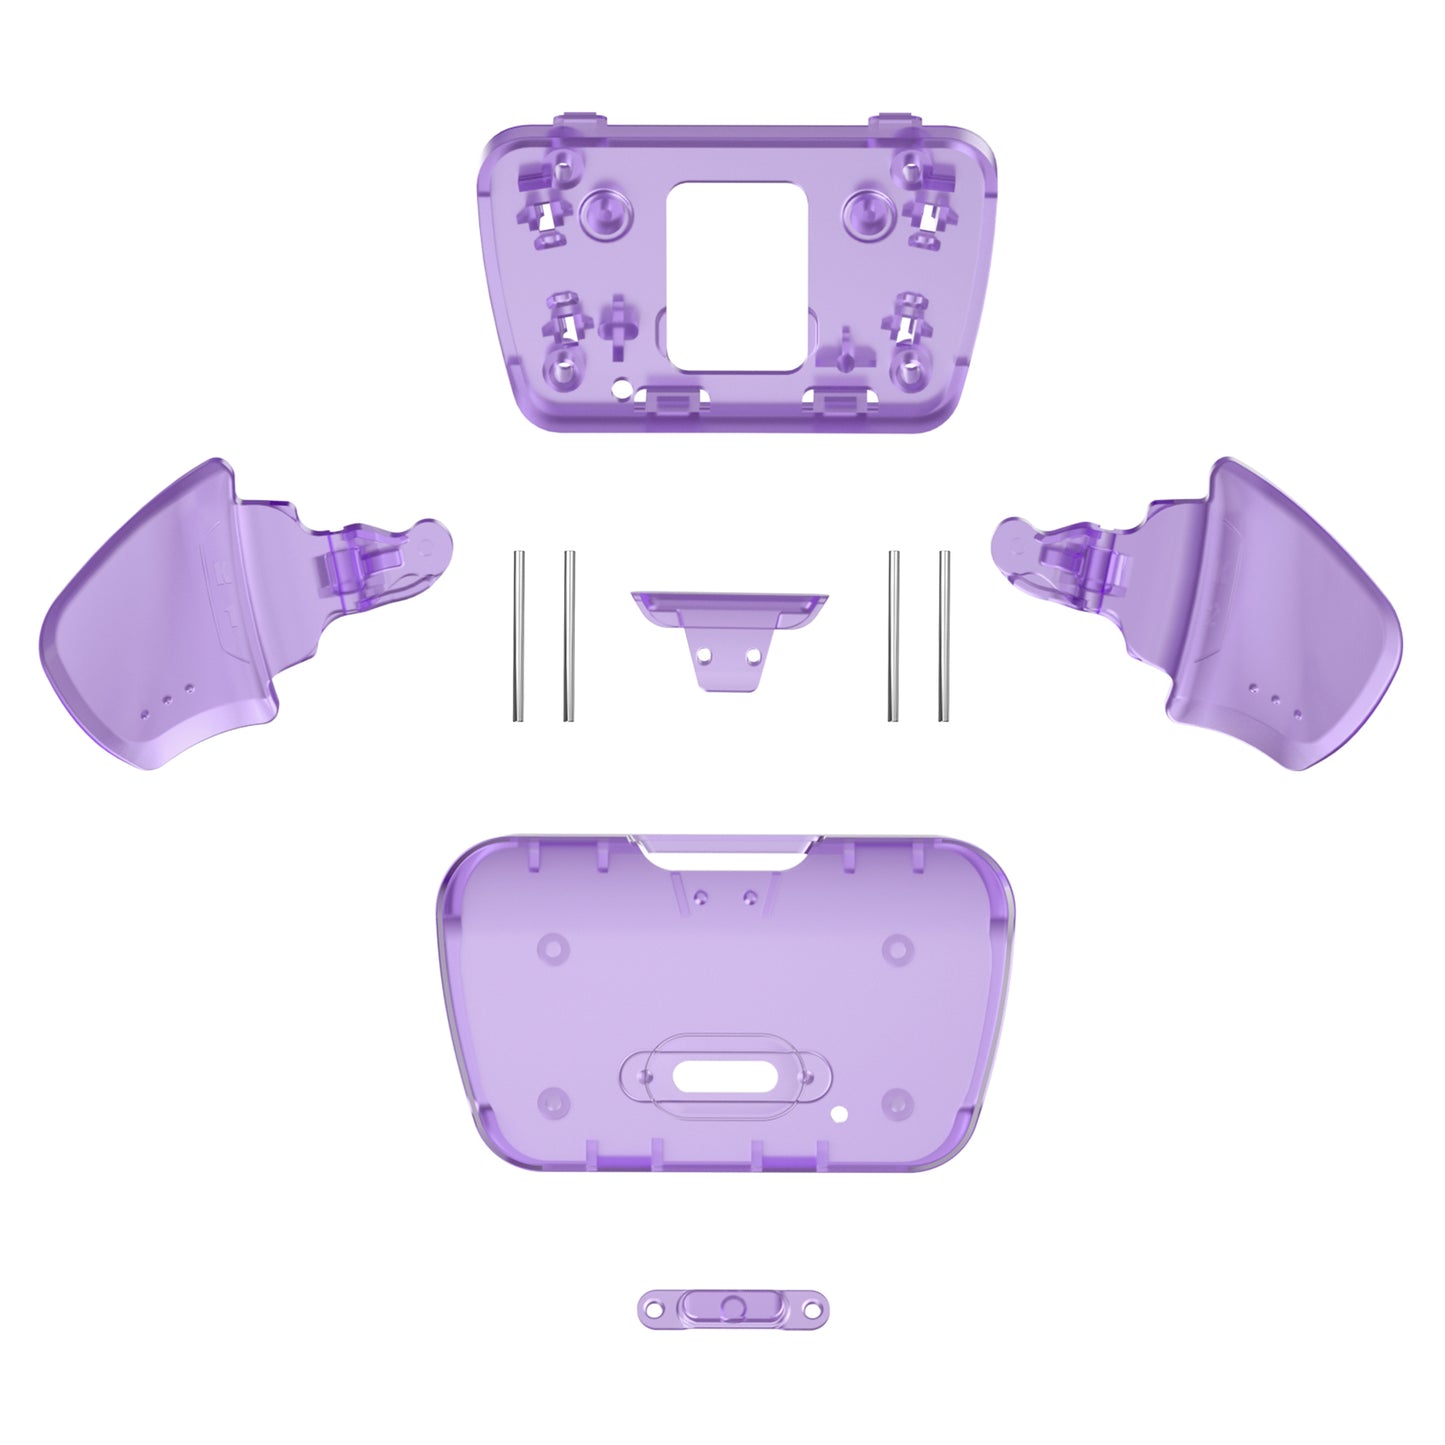 eXtremeRate Retail Clear Atomic Purple Replacement Redesigned K1 K2 Back Button Housing Shell for ps5 Controller eXtremerate RISE Remap Kit - Controller & RISE Remap Board NOT Included - WPFM5005